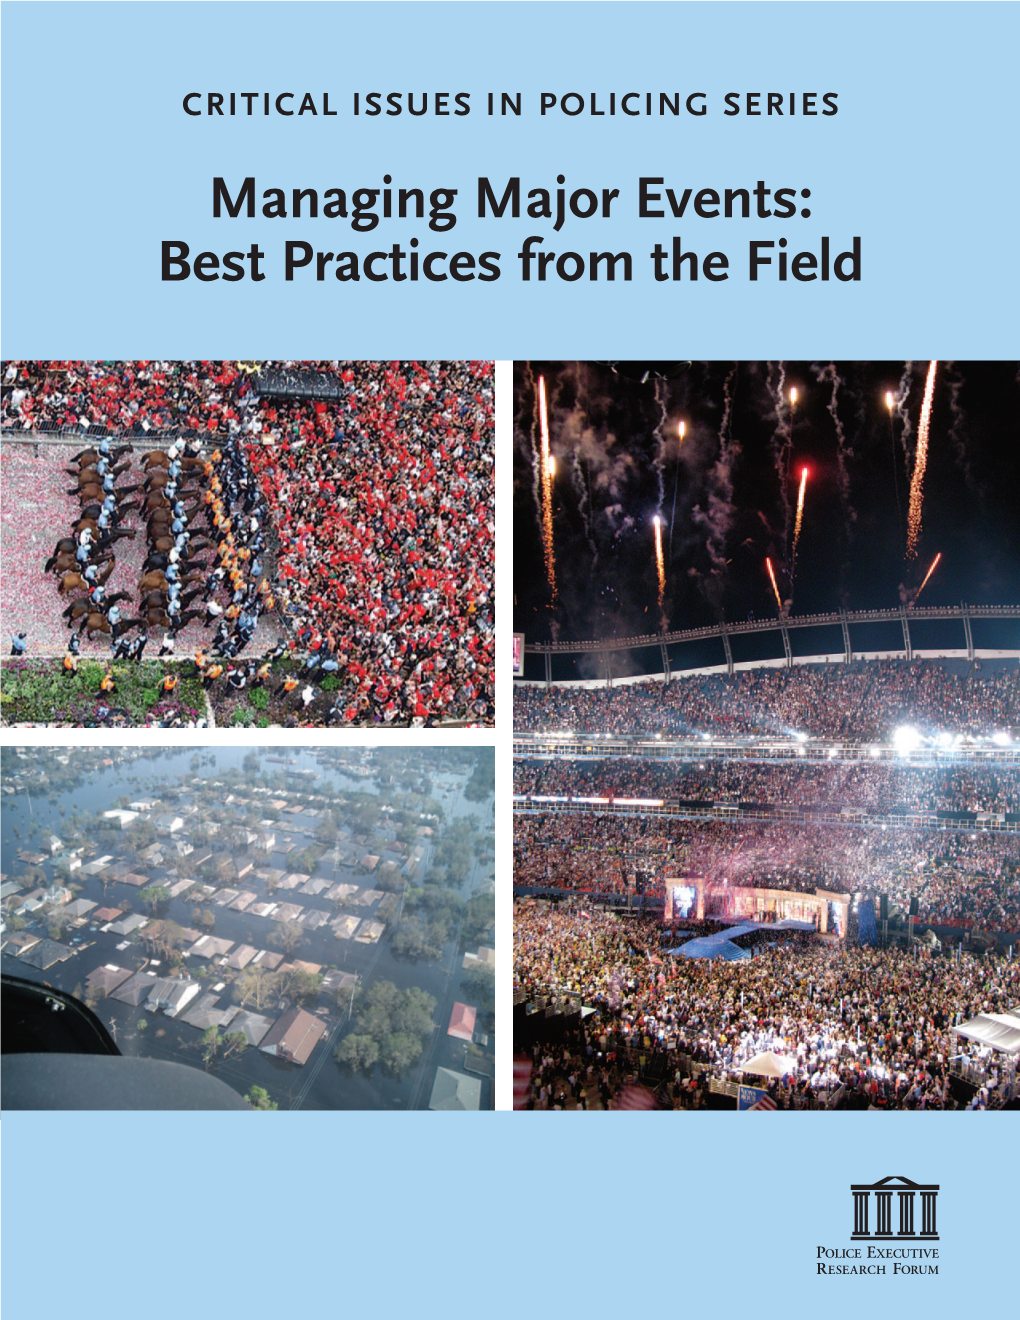 Managing Major Events: Best Practices from the Field CRITICAL ISSUES in POLICING SERIES Managing Major Events: Best Practices from the Field